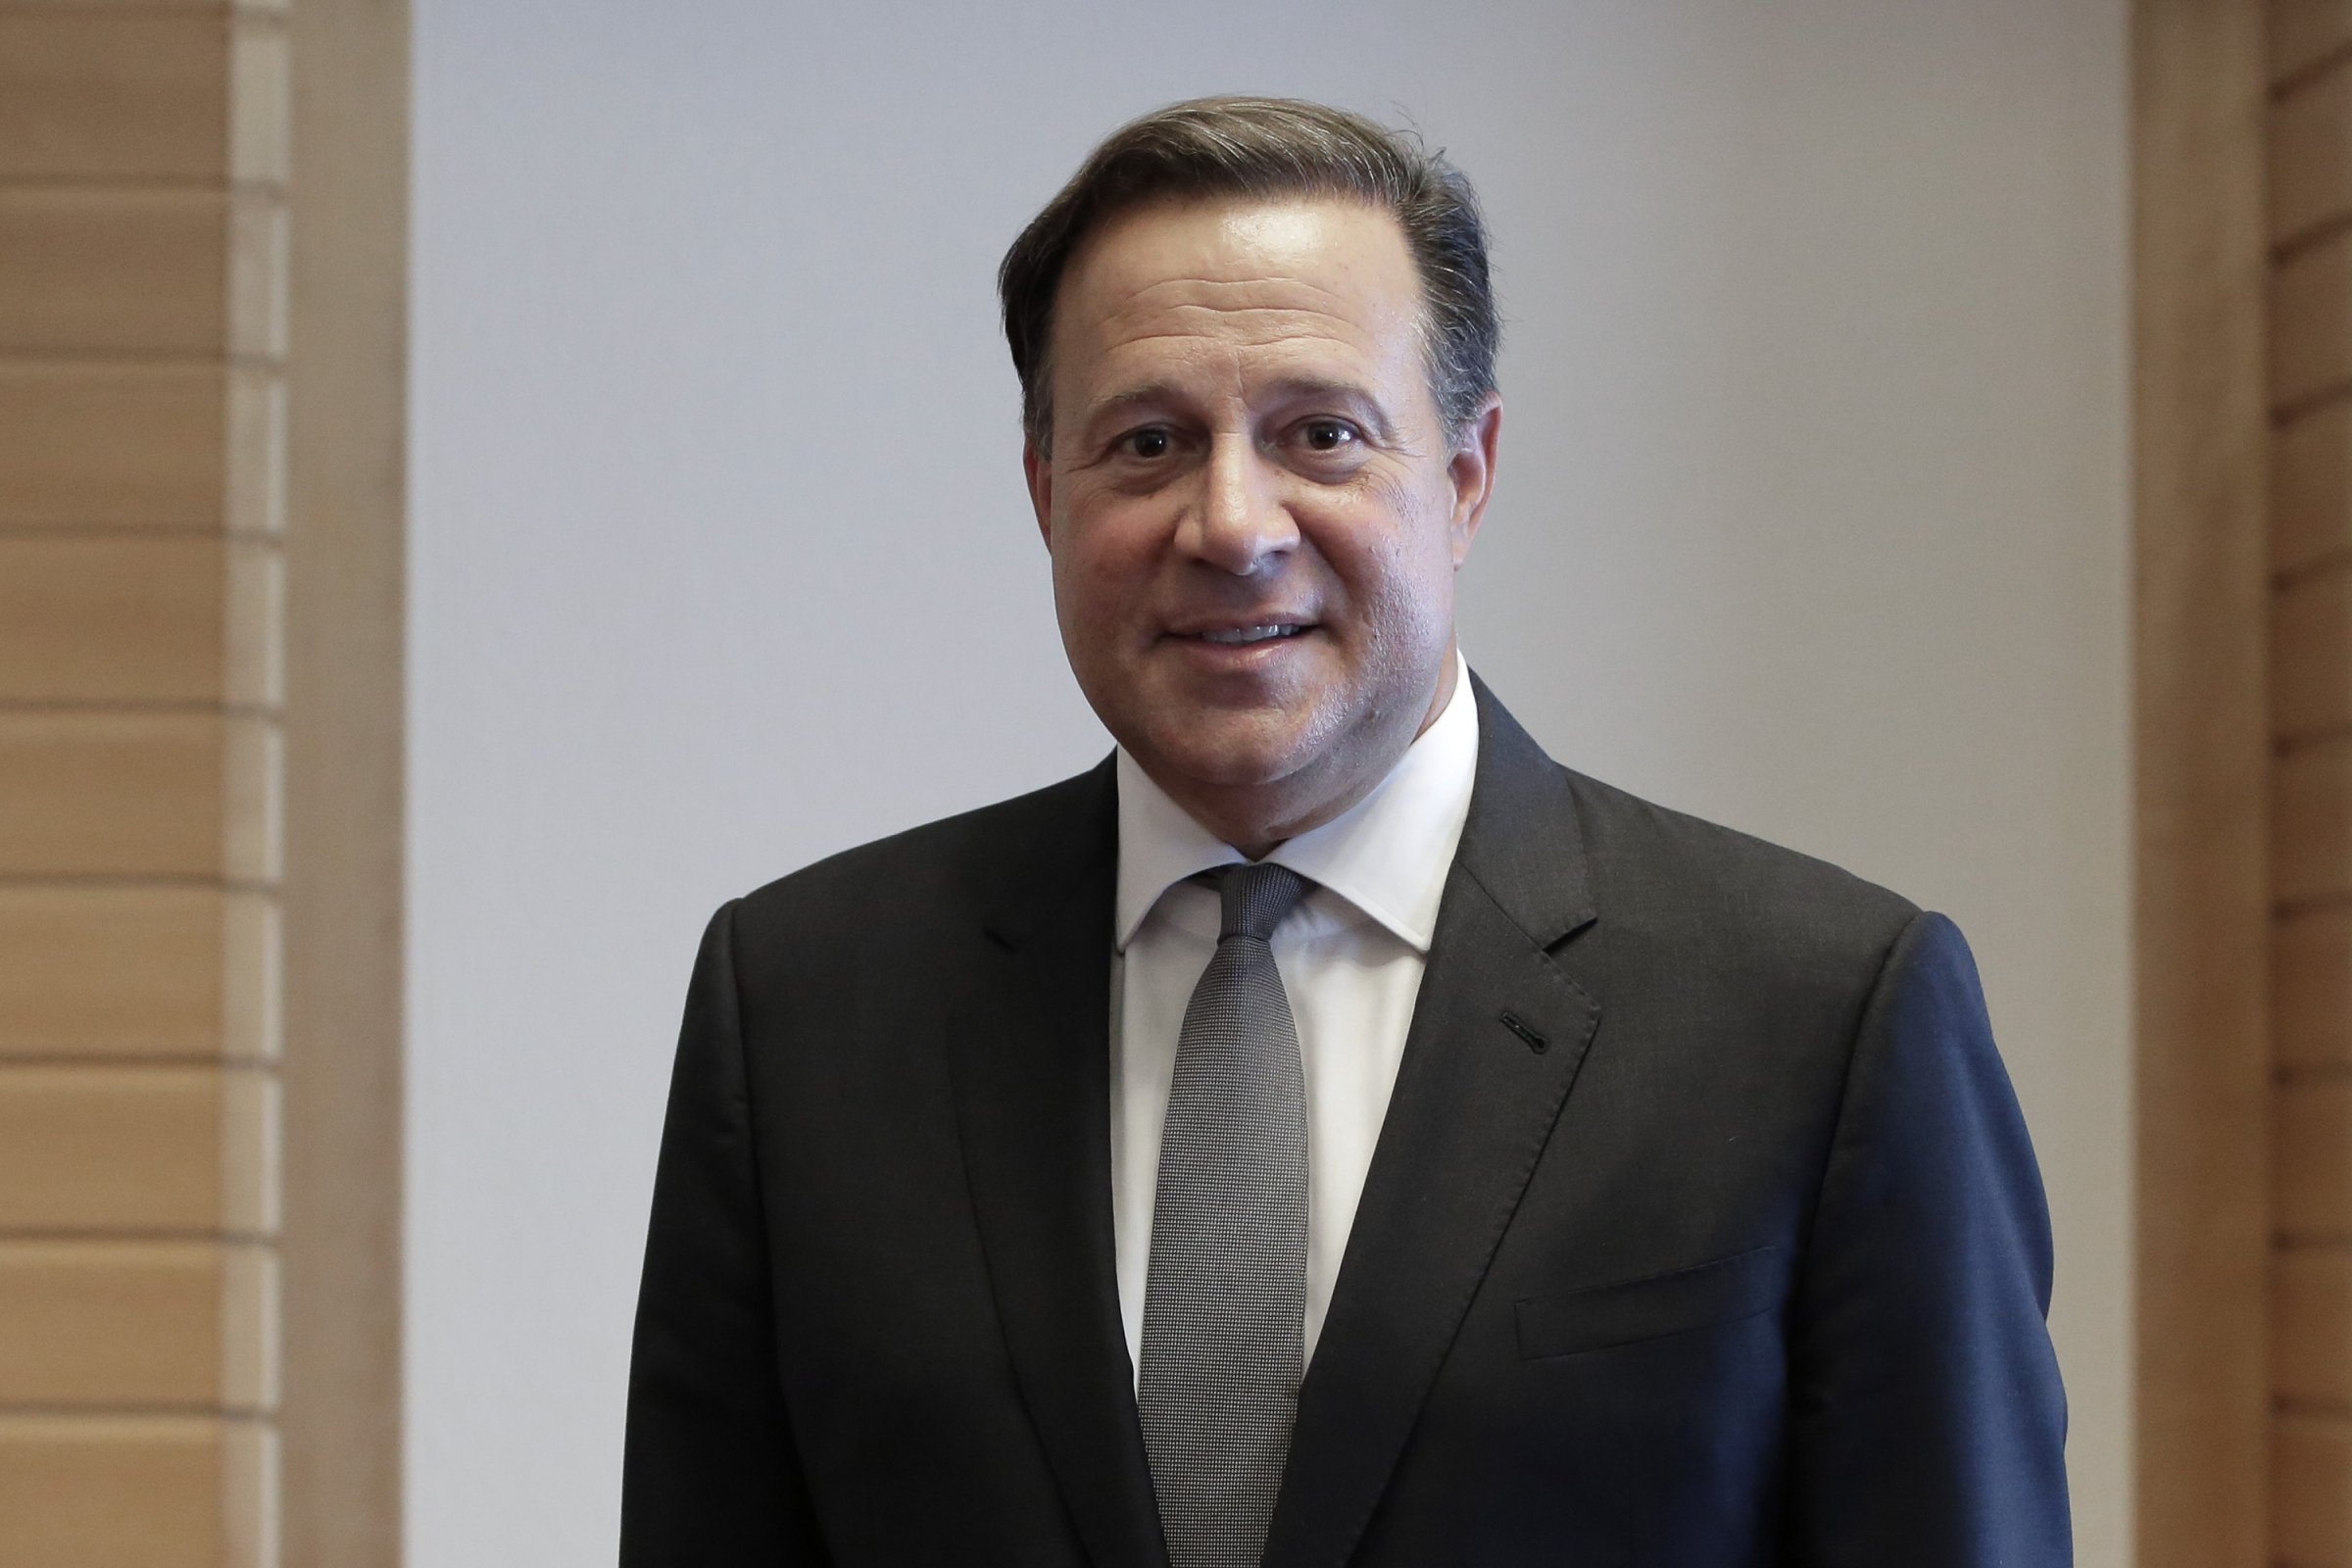 Juan Carlos Varela, Panama's president, poses for a photograph following an interview in Tokyo on April 19, 2016.